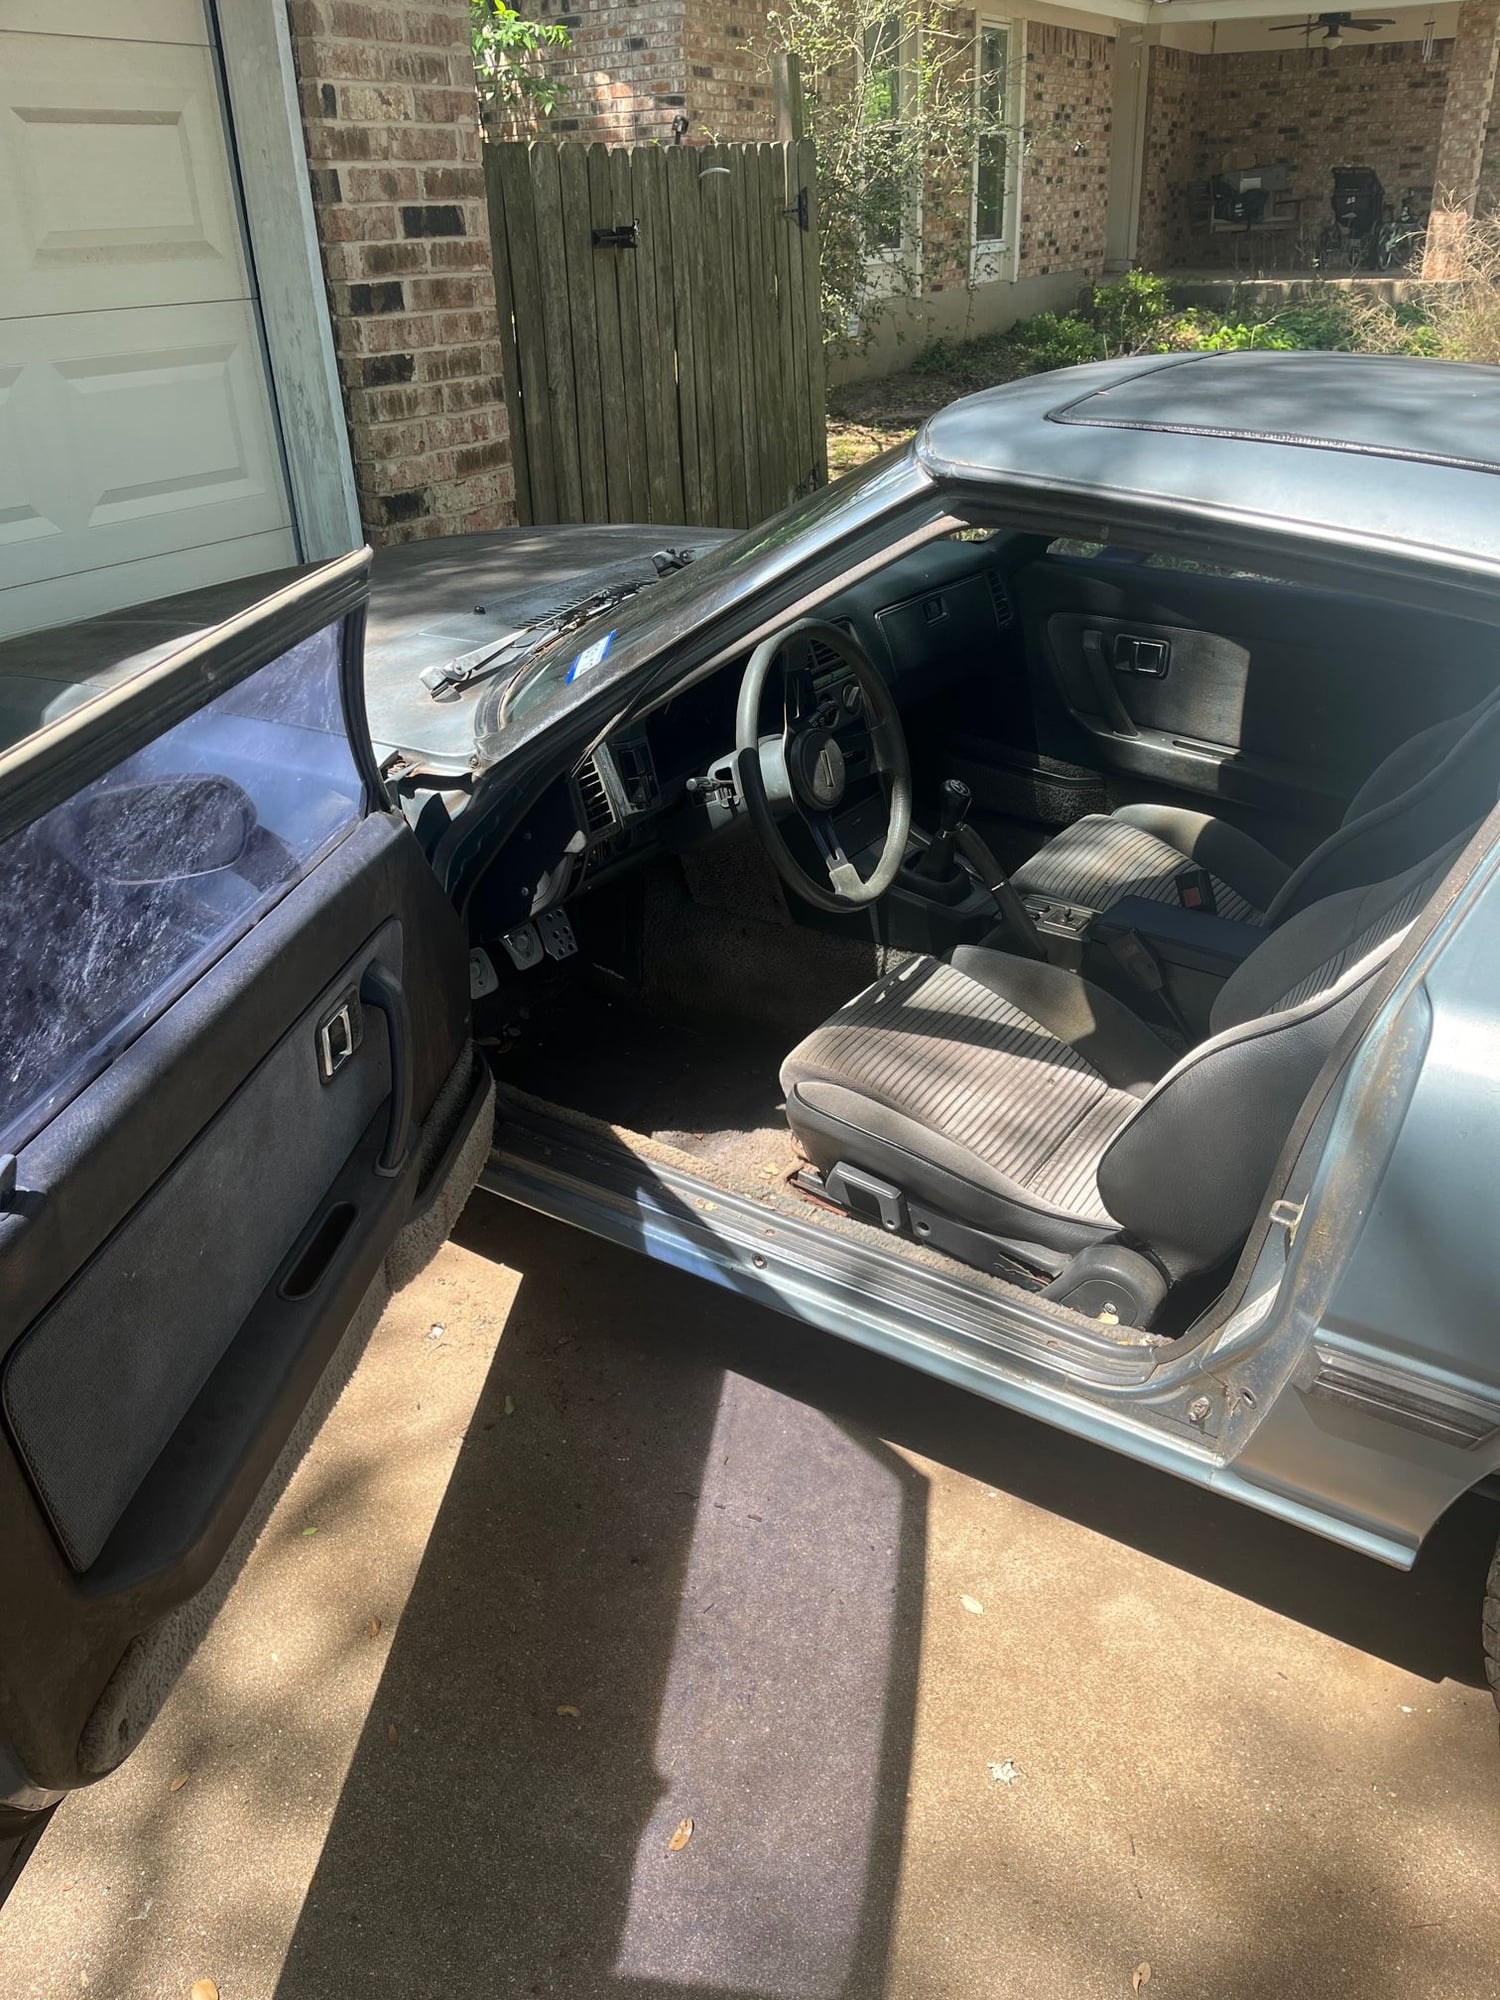 1985 Mazda RX-7 - Selling my 1985 GSL-SE Tender Blue, 161K $3500 (Austin,TX) - Used - VIN will edit - 161,902 Miles - Other - 2WD - Manual - Coupe - Blue - Austin, TX 78749, United States